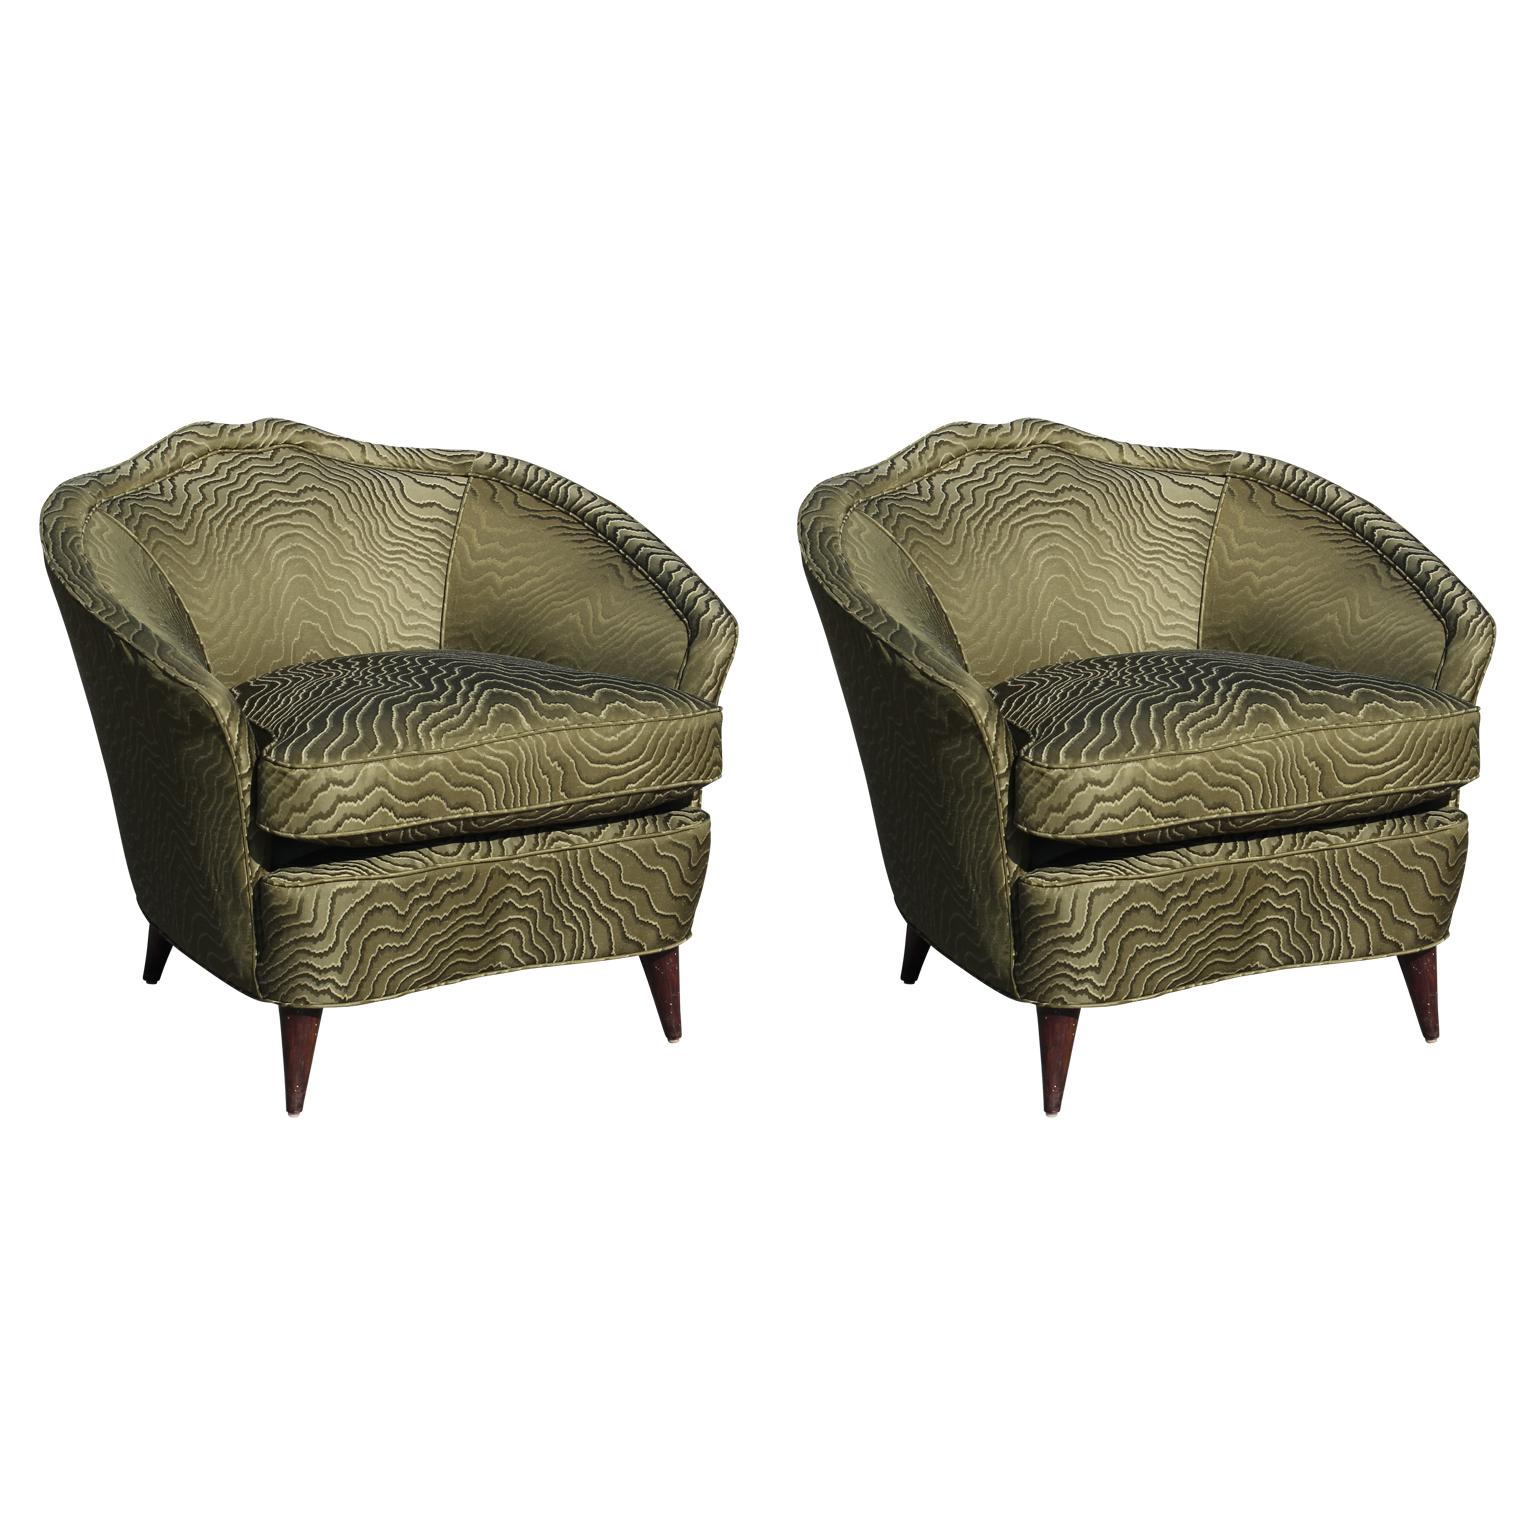 Pair of Modern Italian Lounge Chairs in Green Patterned Clarke and Clarke Fabric